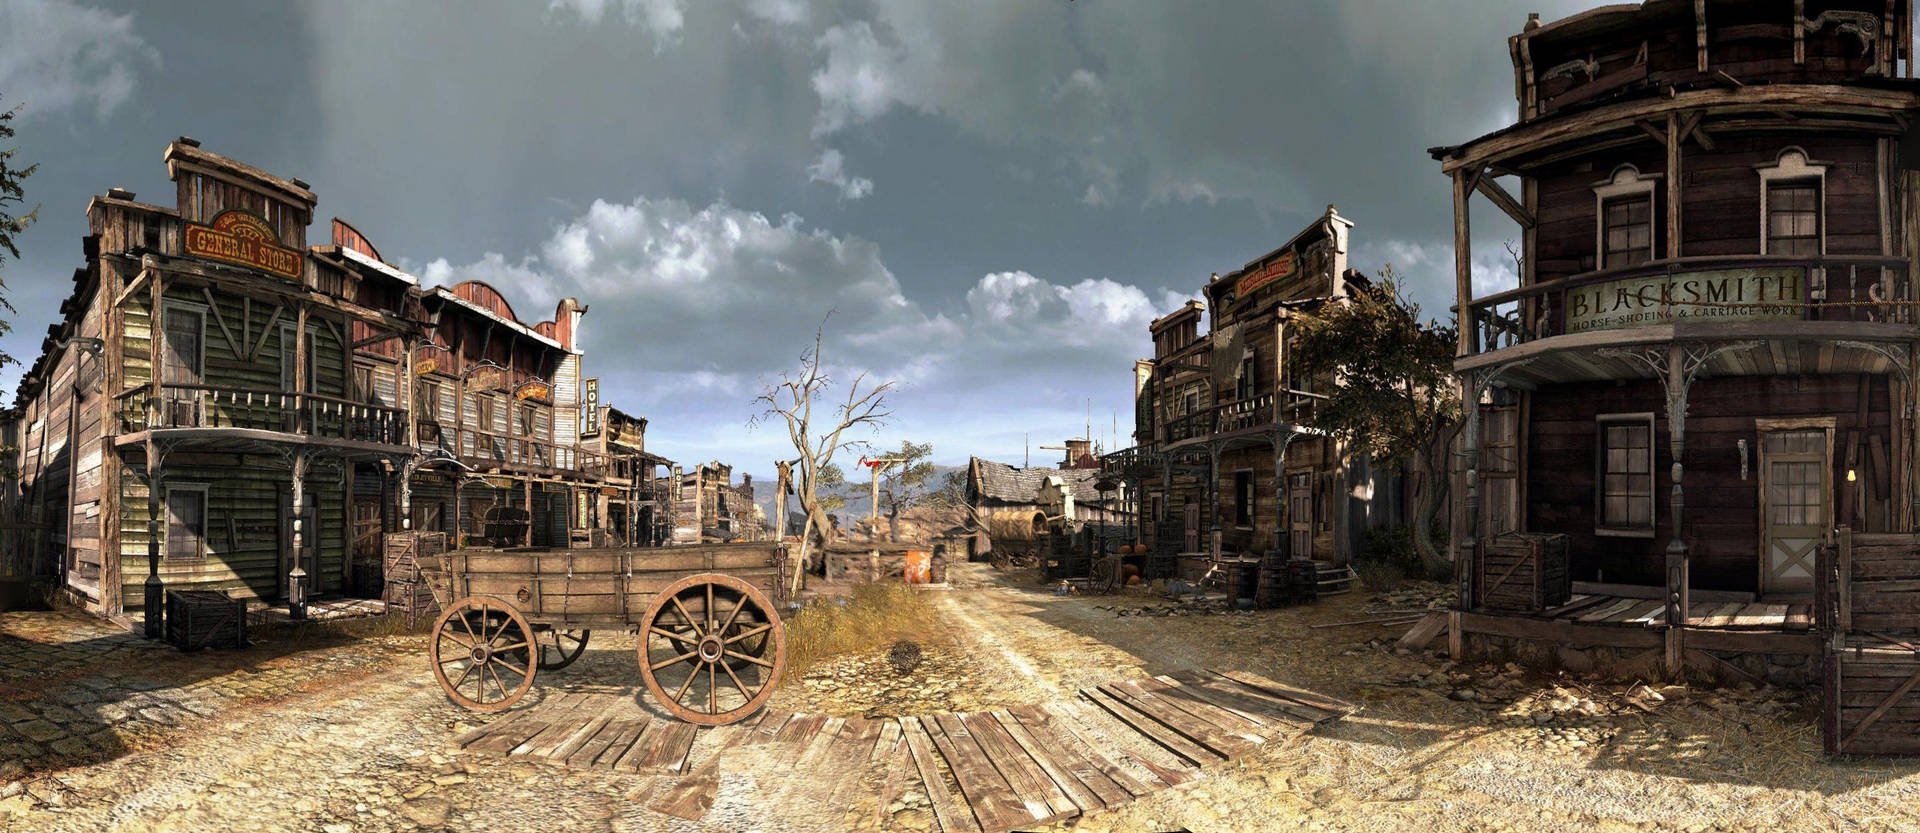 Old And Decaying Western Town Wallpaper